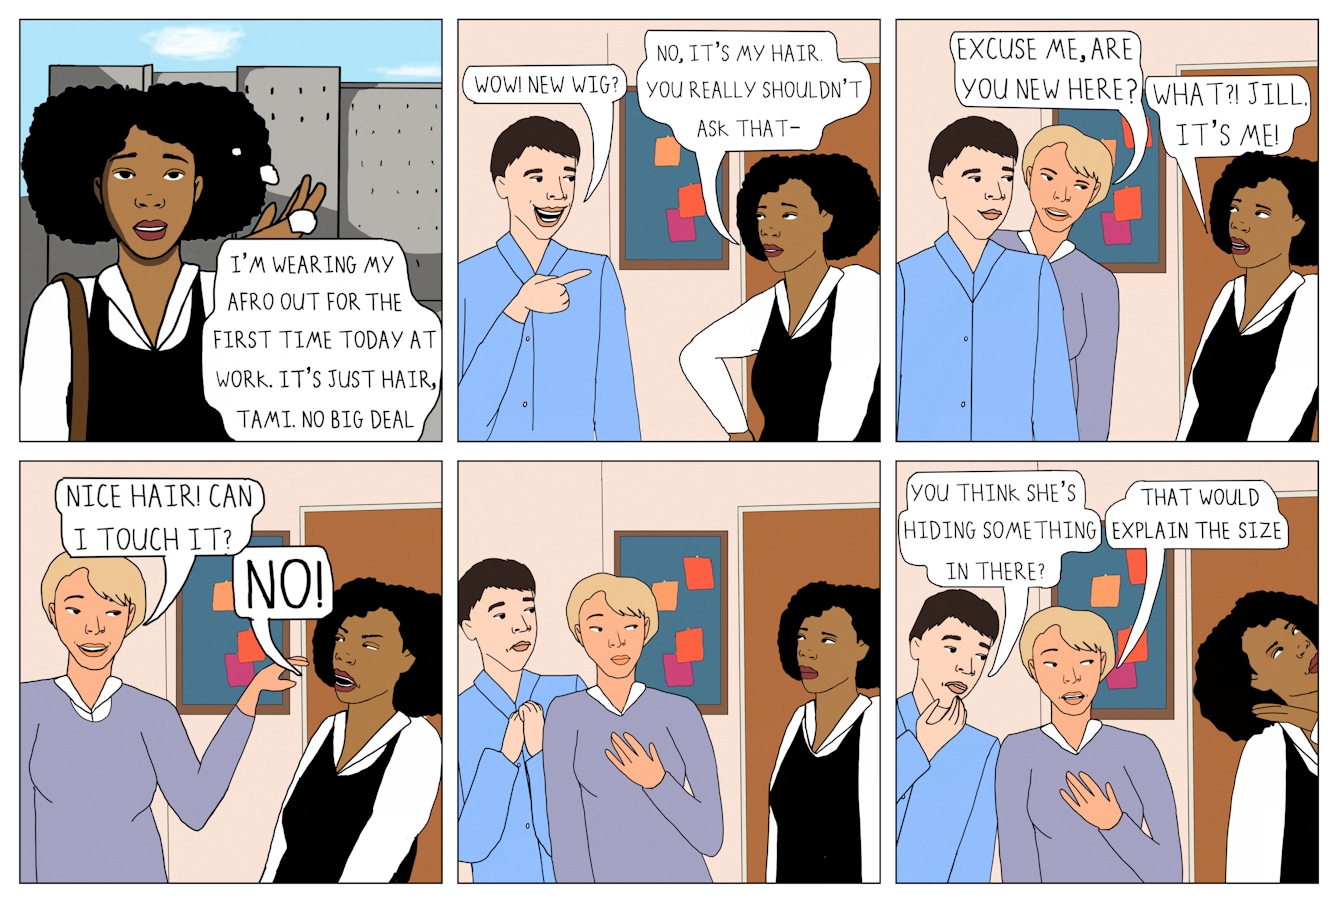 Six panel colour comic strip in a grid of 3 panels wide by 2 panels high.  The first panel shows a Black woman with an Afro standing outside. She is wearing a white collared blouse with a black pinafore dress and a brown shoulder bag. A speech bubble from her reads ‘I’m wearing my Afro out for the first time today at work. It’s just hair, Tami. No big deal.’  The second panel shows Tami and a white man with dark hair wearing a blue shirt. They are stood talking to each other inside their place of work. Behind them is a bulletin board. The man is grinning and pointing at Tami’s hair. She has a mildly irritated facial expression, with one hand on her hip. A speech bubble comes from the man and reads ‘Wow! New wig?’. A speech bubble comes from Tami and reads ‘No, it’s my hair. You really shouldn’t ask that -’.   The second panel shows the same characters joined by a white woman with short blond hair. She is wearing a light purple blouse and is stood next to the man, facing Tami. A speech bubble from the white woman reads ‘Excuse me, are you new here?’. Tami looks surprised. A speech bubble comes from her and reads ‘What?! Jill, it’s me!’   The third panel shows Tami and Jill. Jill is smiling and extending her arm out towards the Tami’s Afro. Tami is leaning back, frowning exasperatedly. A speech bubble from Jill reads ‘Nice hair! Can I touch it?’ A speech bubble from Tami reads ‘NO!’   The fifth speech bubble shows all three characters. Jill and the white man are looking at Tami. Both appear sheepish and taken aback. The white man has his hands pulled towards his chest, and Jill has one arm to her chest. Tami is stood facing them.   The sixth speech bubble shows the same three characters. Jill and the white man are shown standing next to one another, facing Tami and muttering. Tami has faced away from them, her eyes rolled back and her head held high. She appears to be walking away from them, her hand raised to the side of her Afro. A speech bubble from the white man reads ‘You think she’s hiding something in there?’ A speech bubble from Jill reads ‘That would explain the size’ 